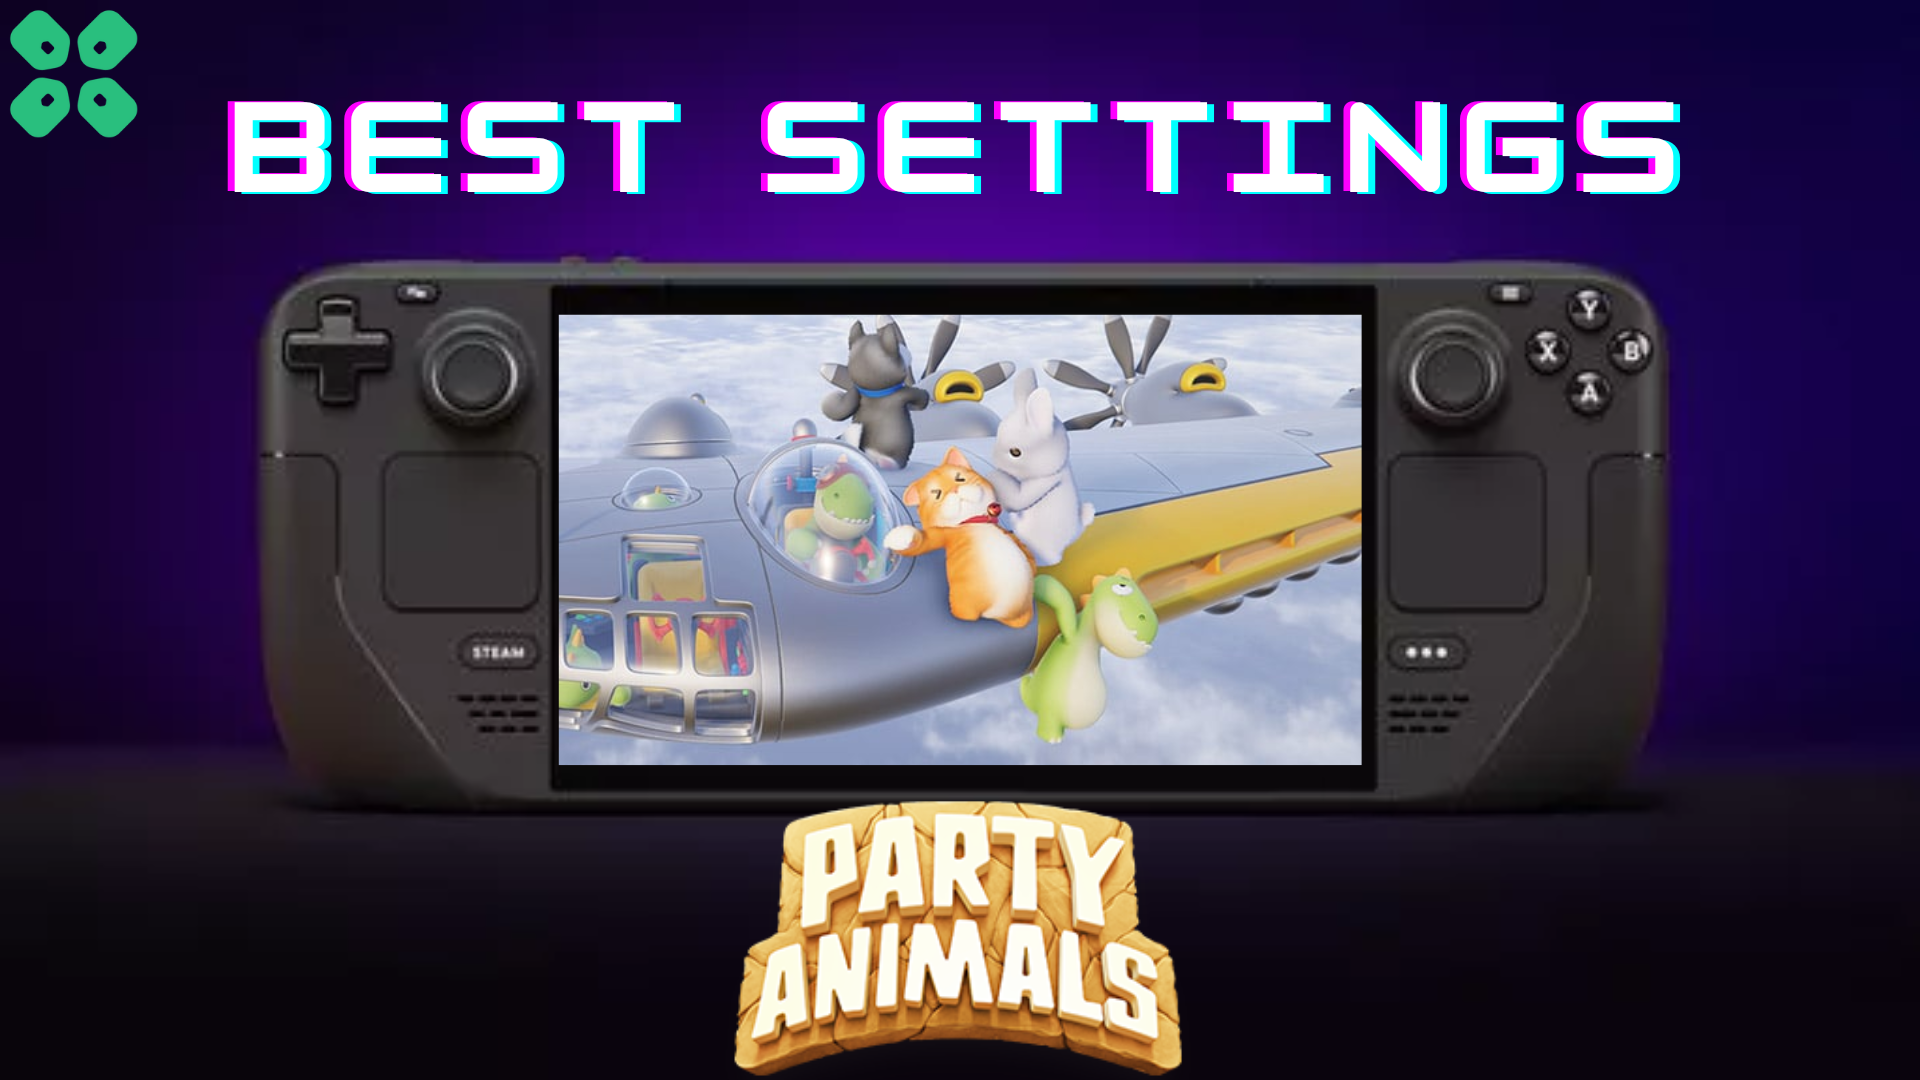 Best Game Settings to Play Party Animals on Steam Deck